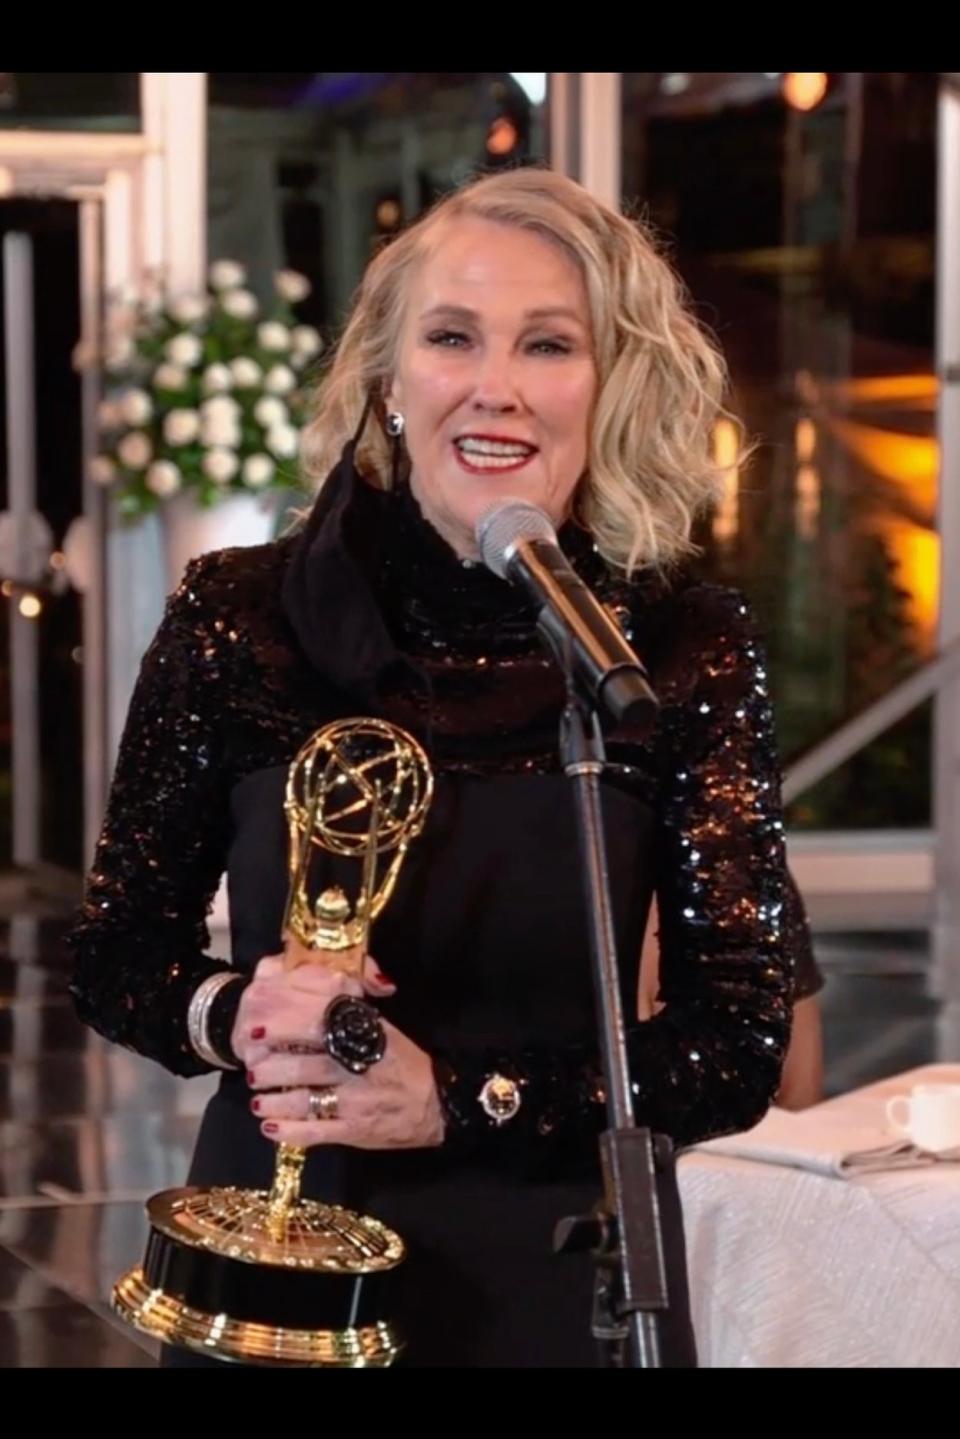 Woman in black dress holding an Emmy award at a podium with an audience in the background